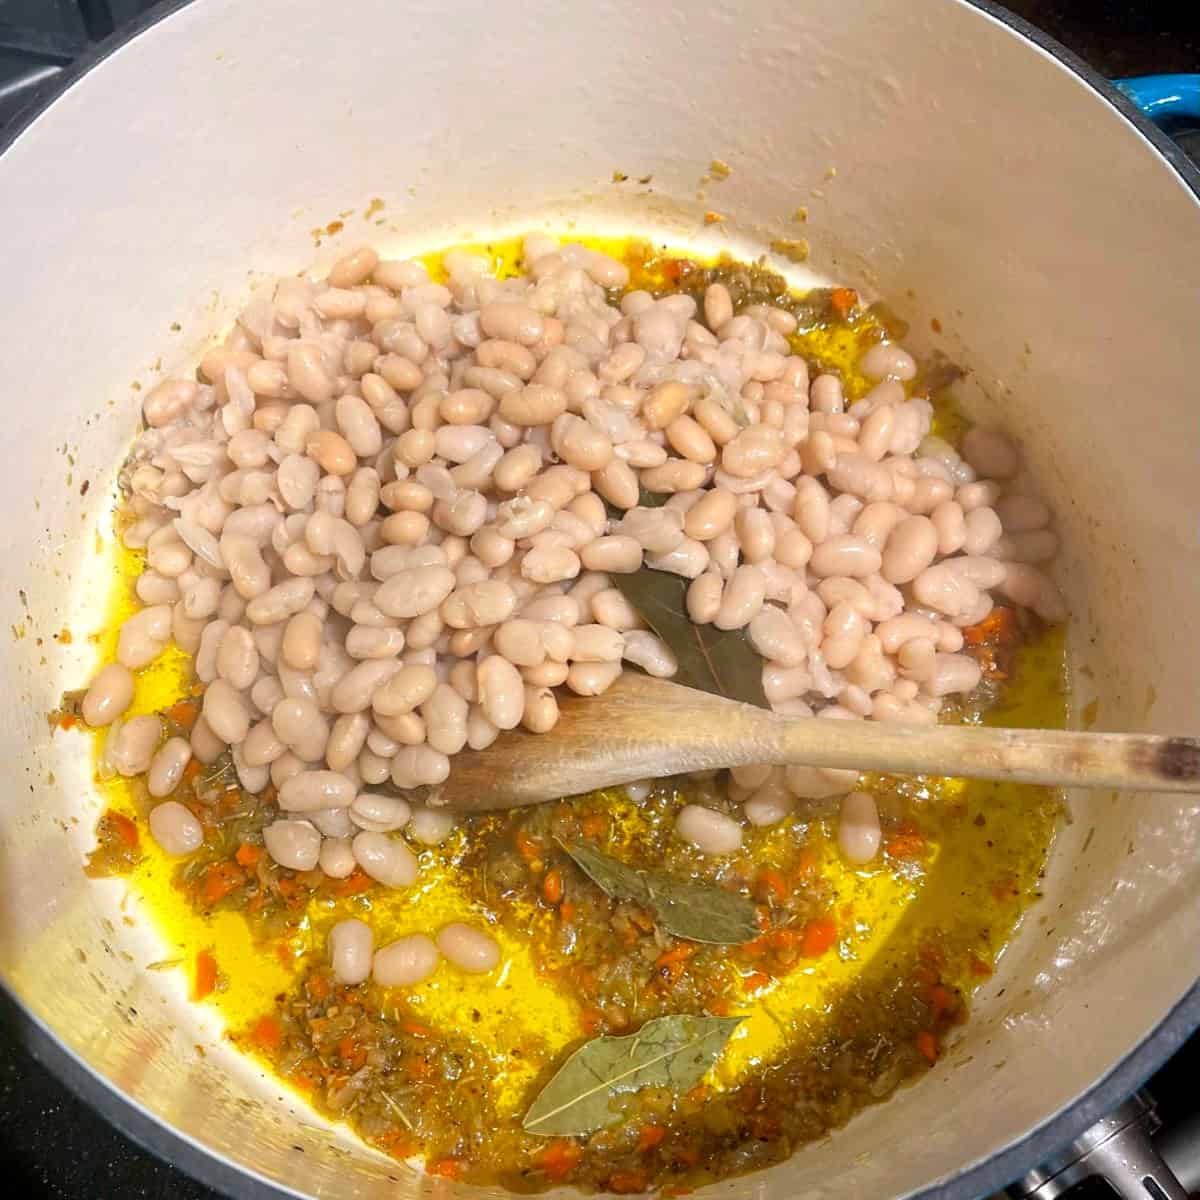 Beans added to pot with sofrito veggies.